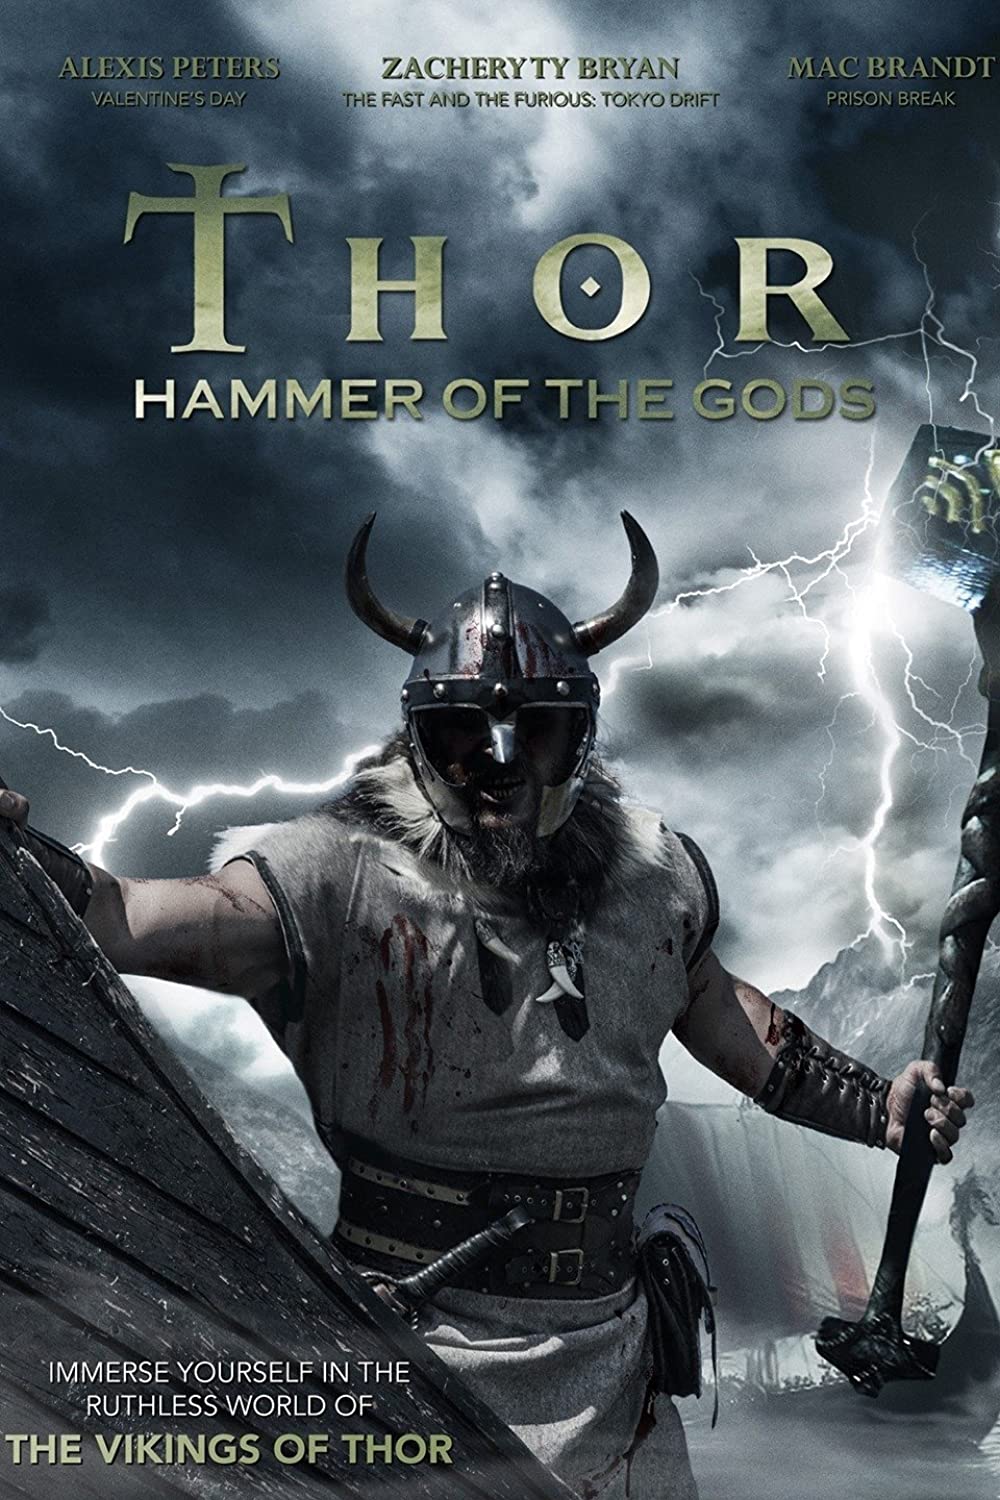 Download Hammer of the Gods Movie | Hammer Of The Gods Dvd